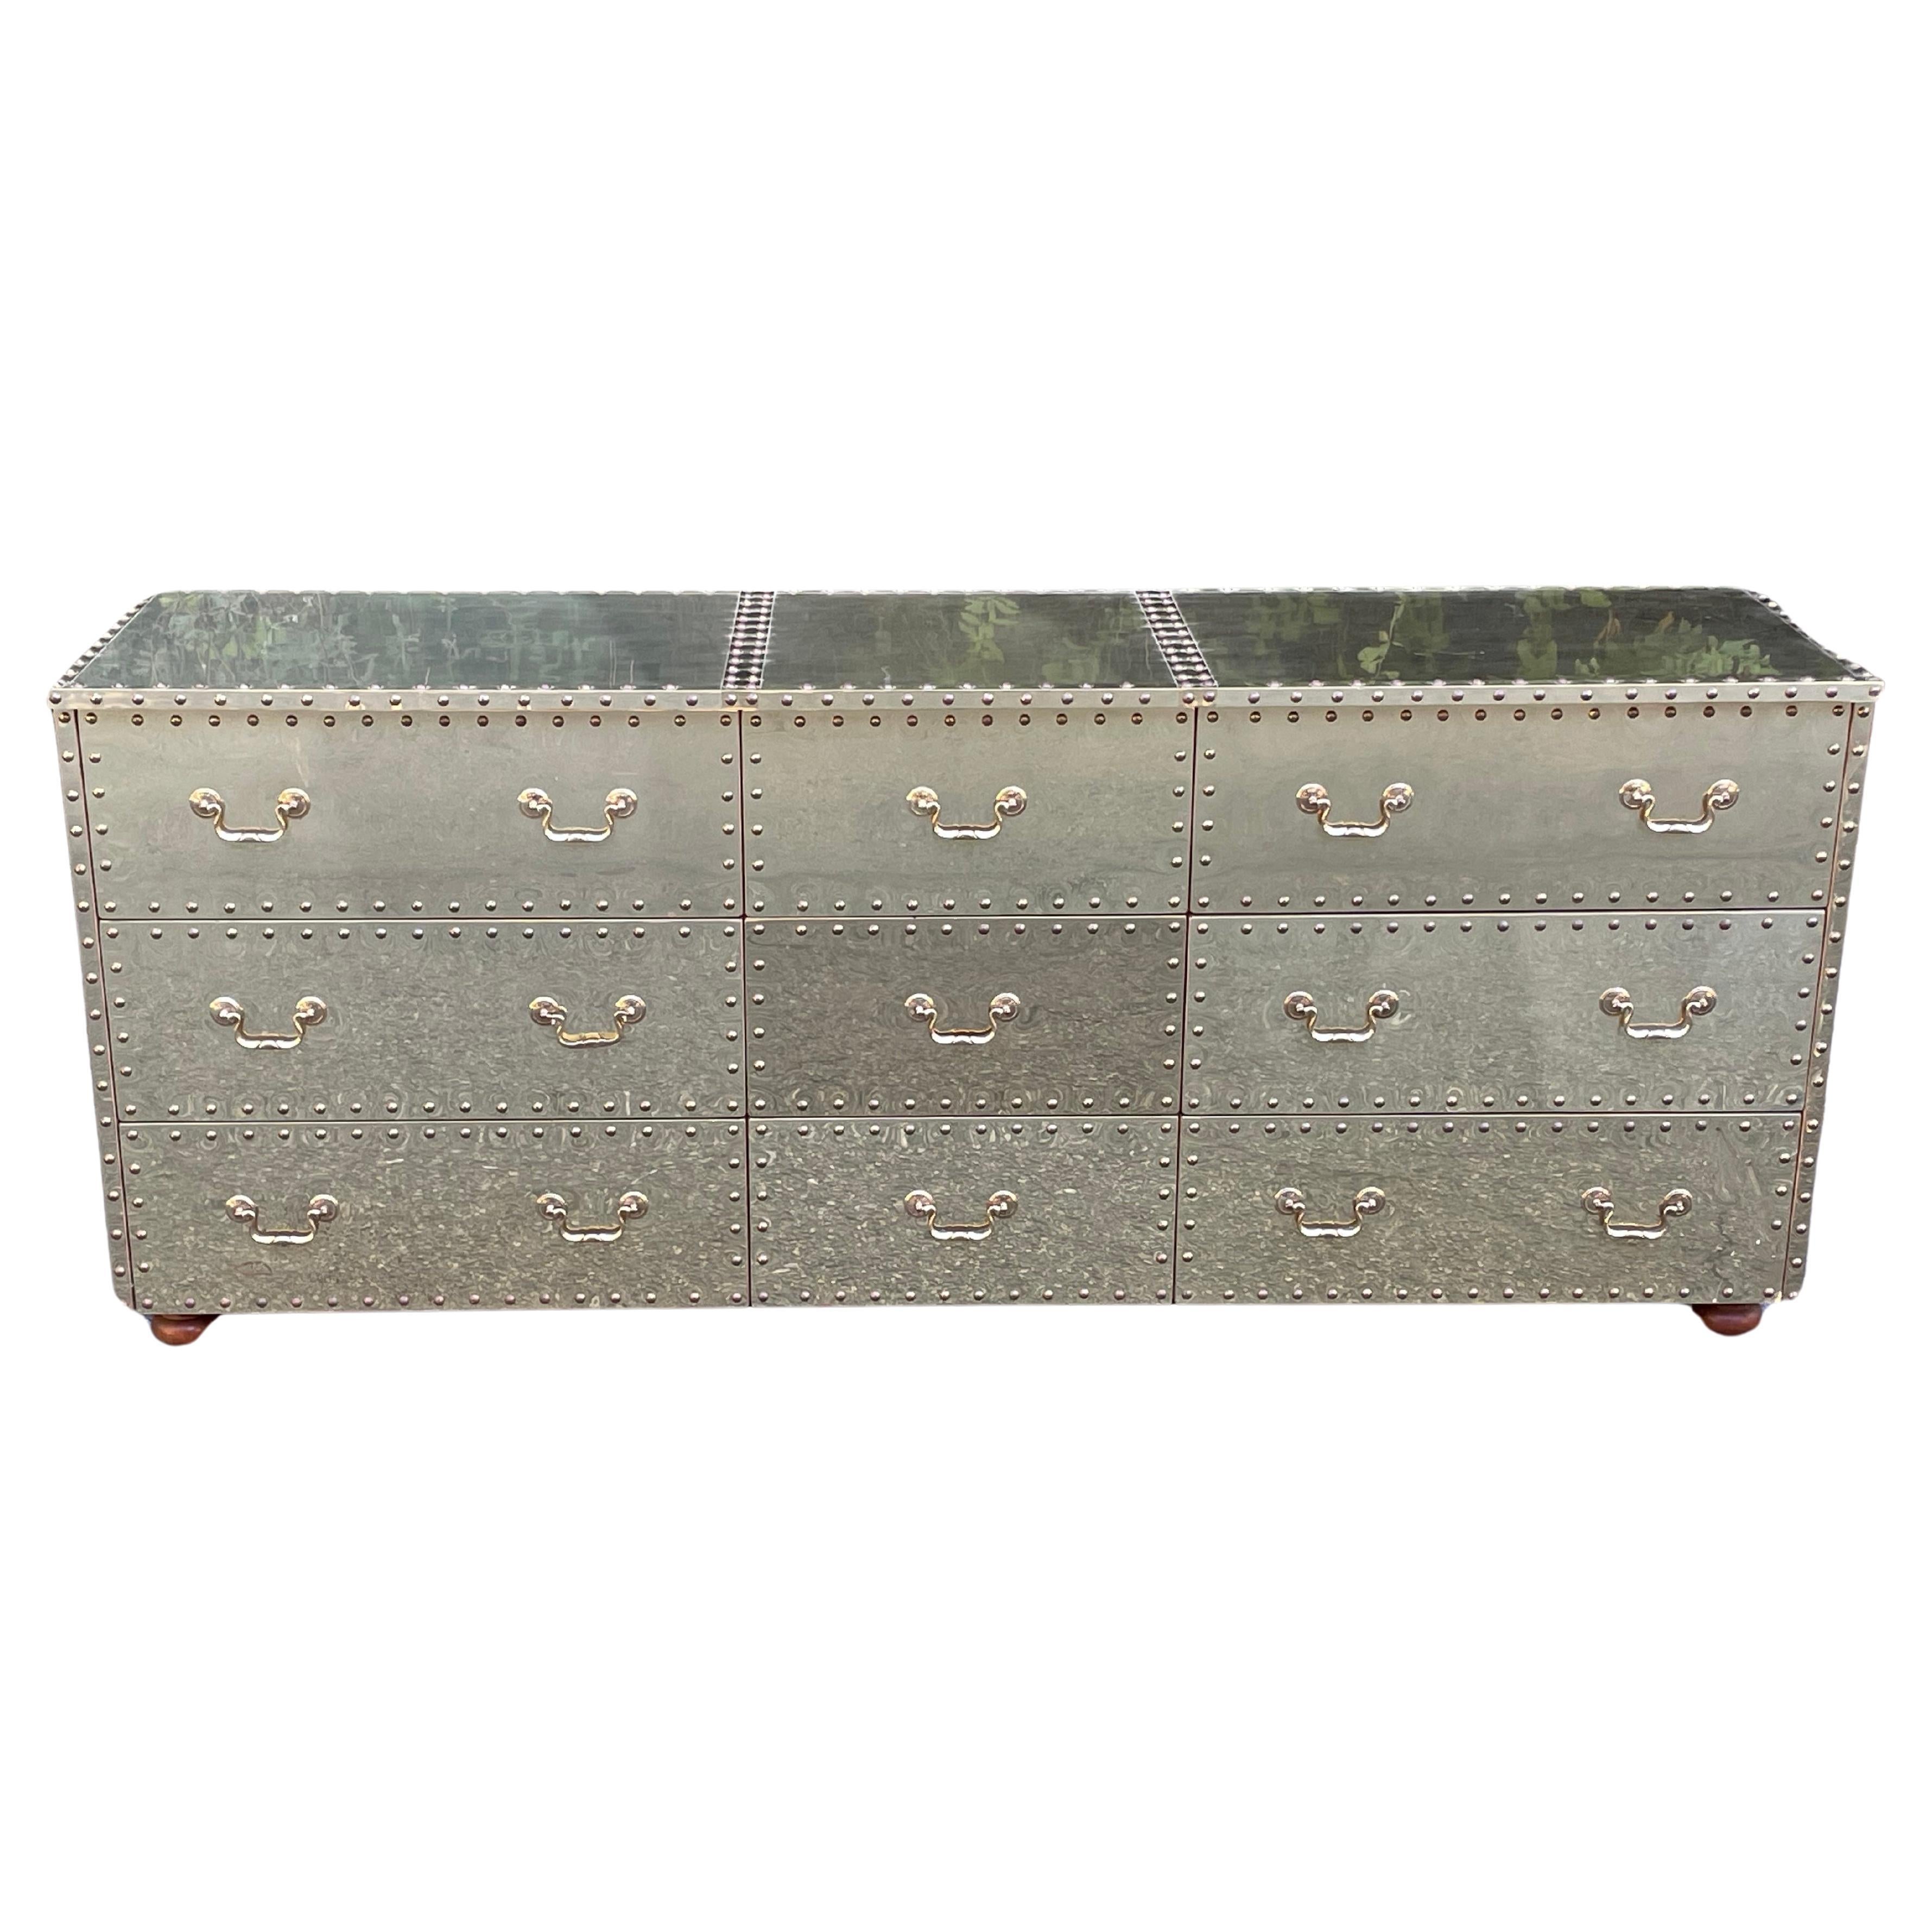 Striking mid-century brass clad nine-drawer dresser with nailhead trim by Sarreid Ltd. Circa 1970s.

Clad on three sides with solid brass sheeting, this triple dresser is one of the most sought after of the vintage Sarreid designs. It really makes a